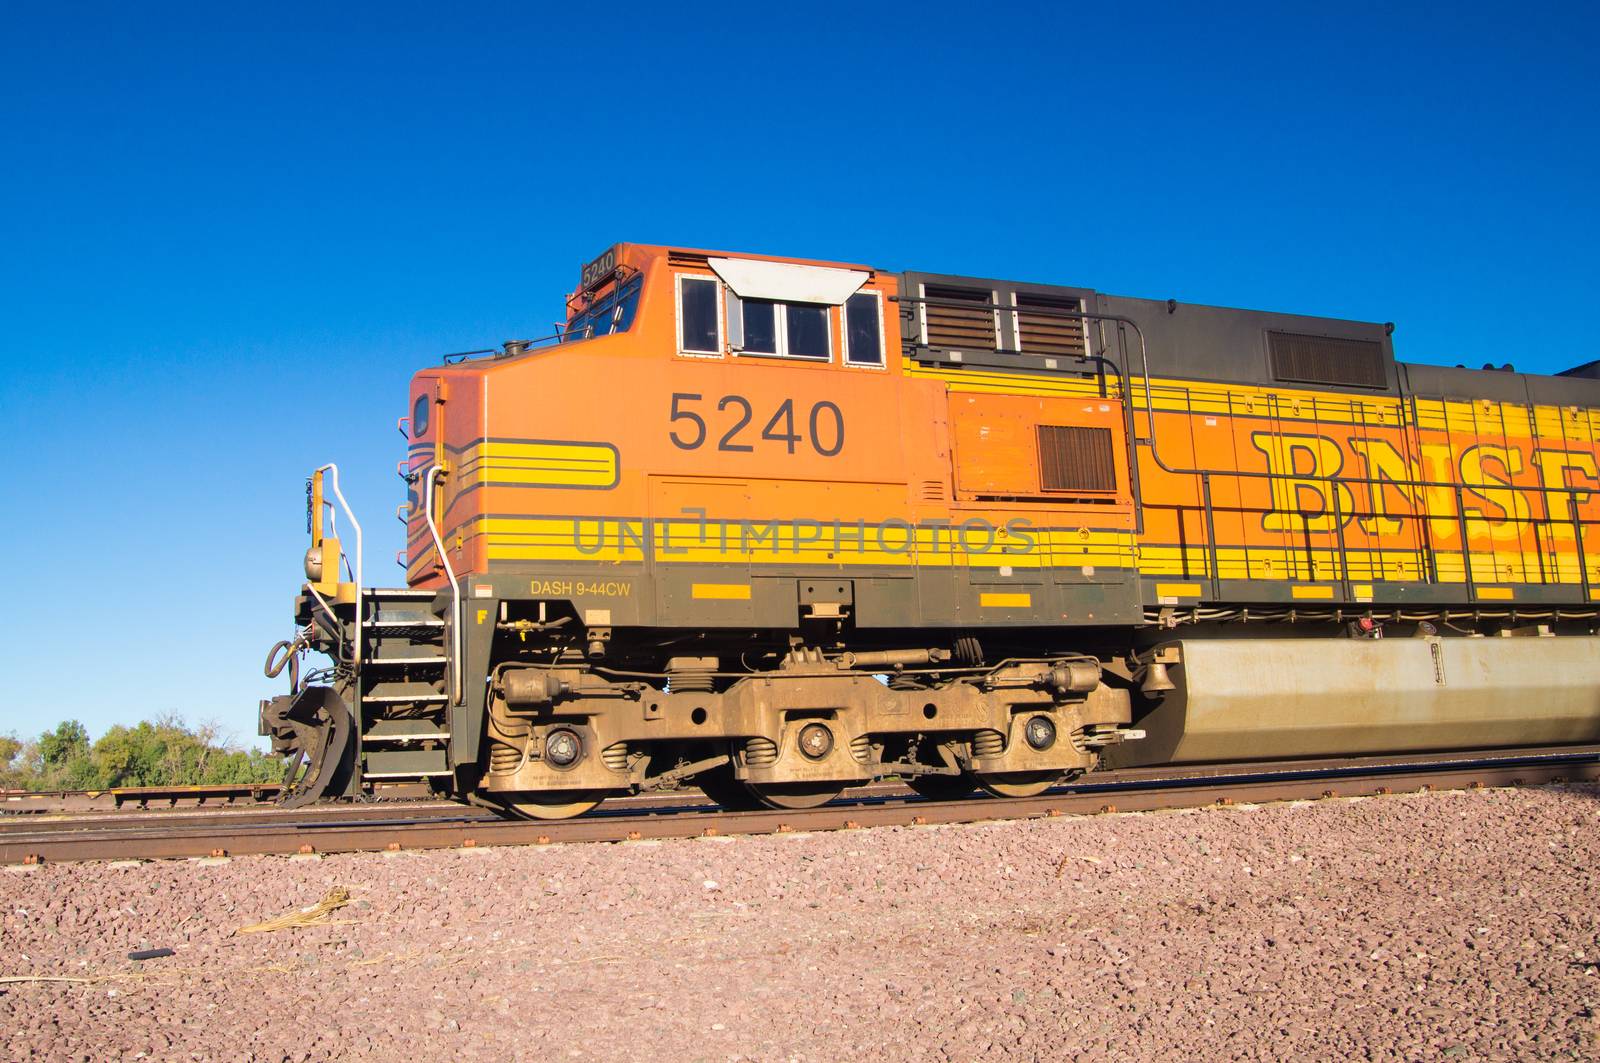 Stationary BNSF Freight Train Locomotive No. 5240 in the desert by emattil